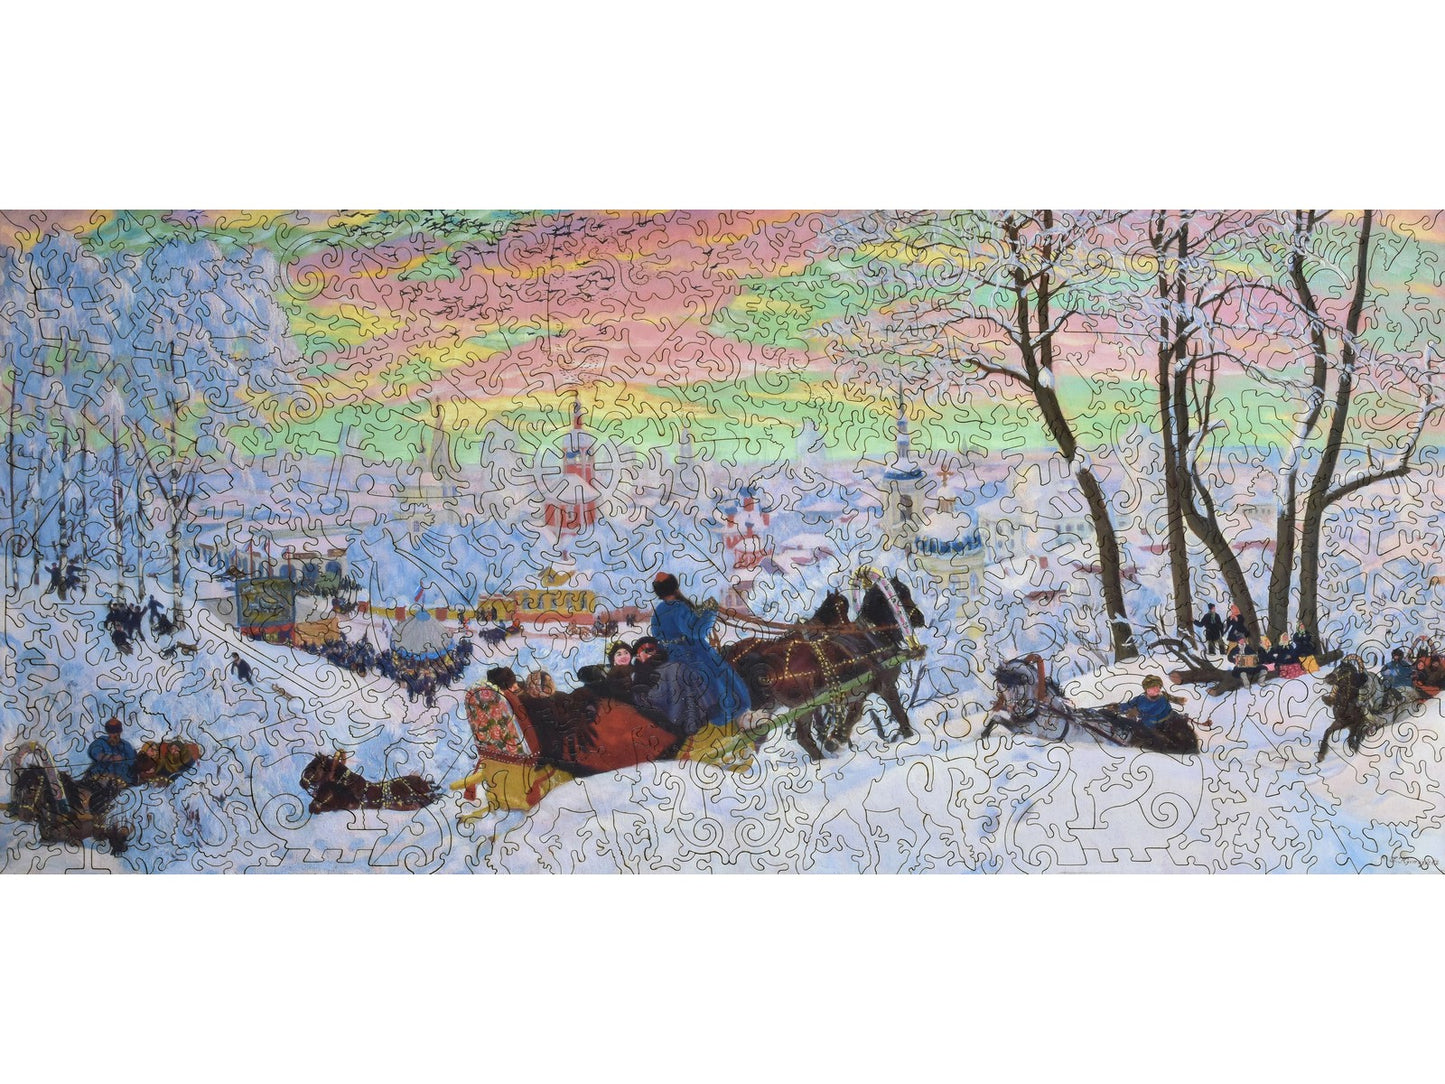 The front of the puzzle, Shrovetide, showing a winter scene with people playing in the snow and a carriage.